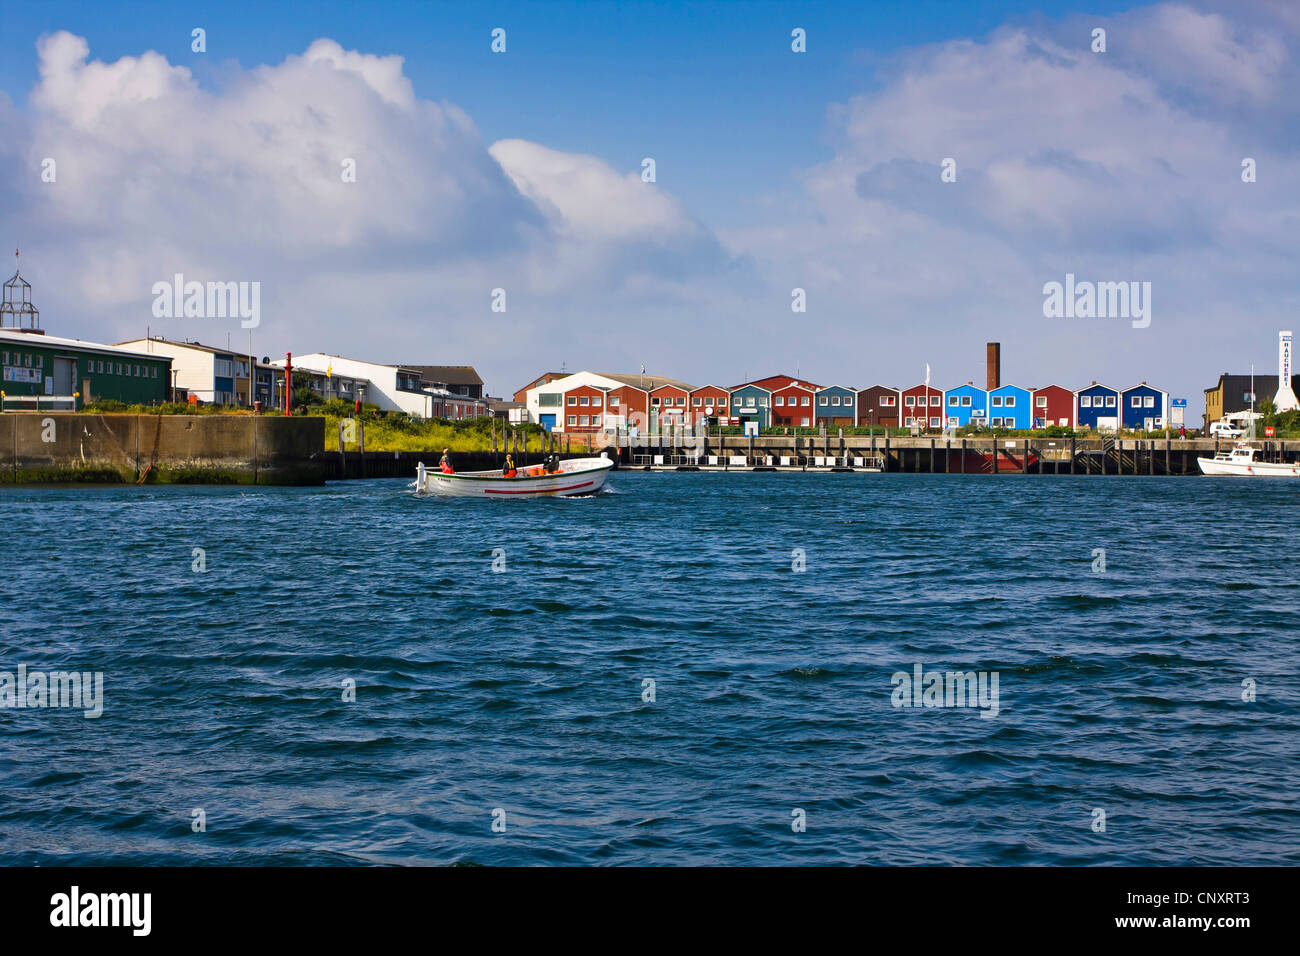 harbour with boats and colourful row of houses at the promenade, Germany, Schleswig-Holstein, Heligoland Stock Photo